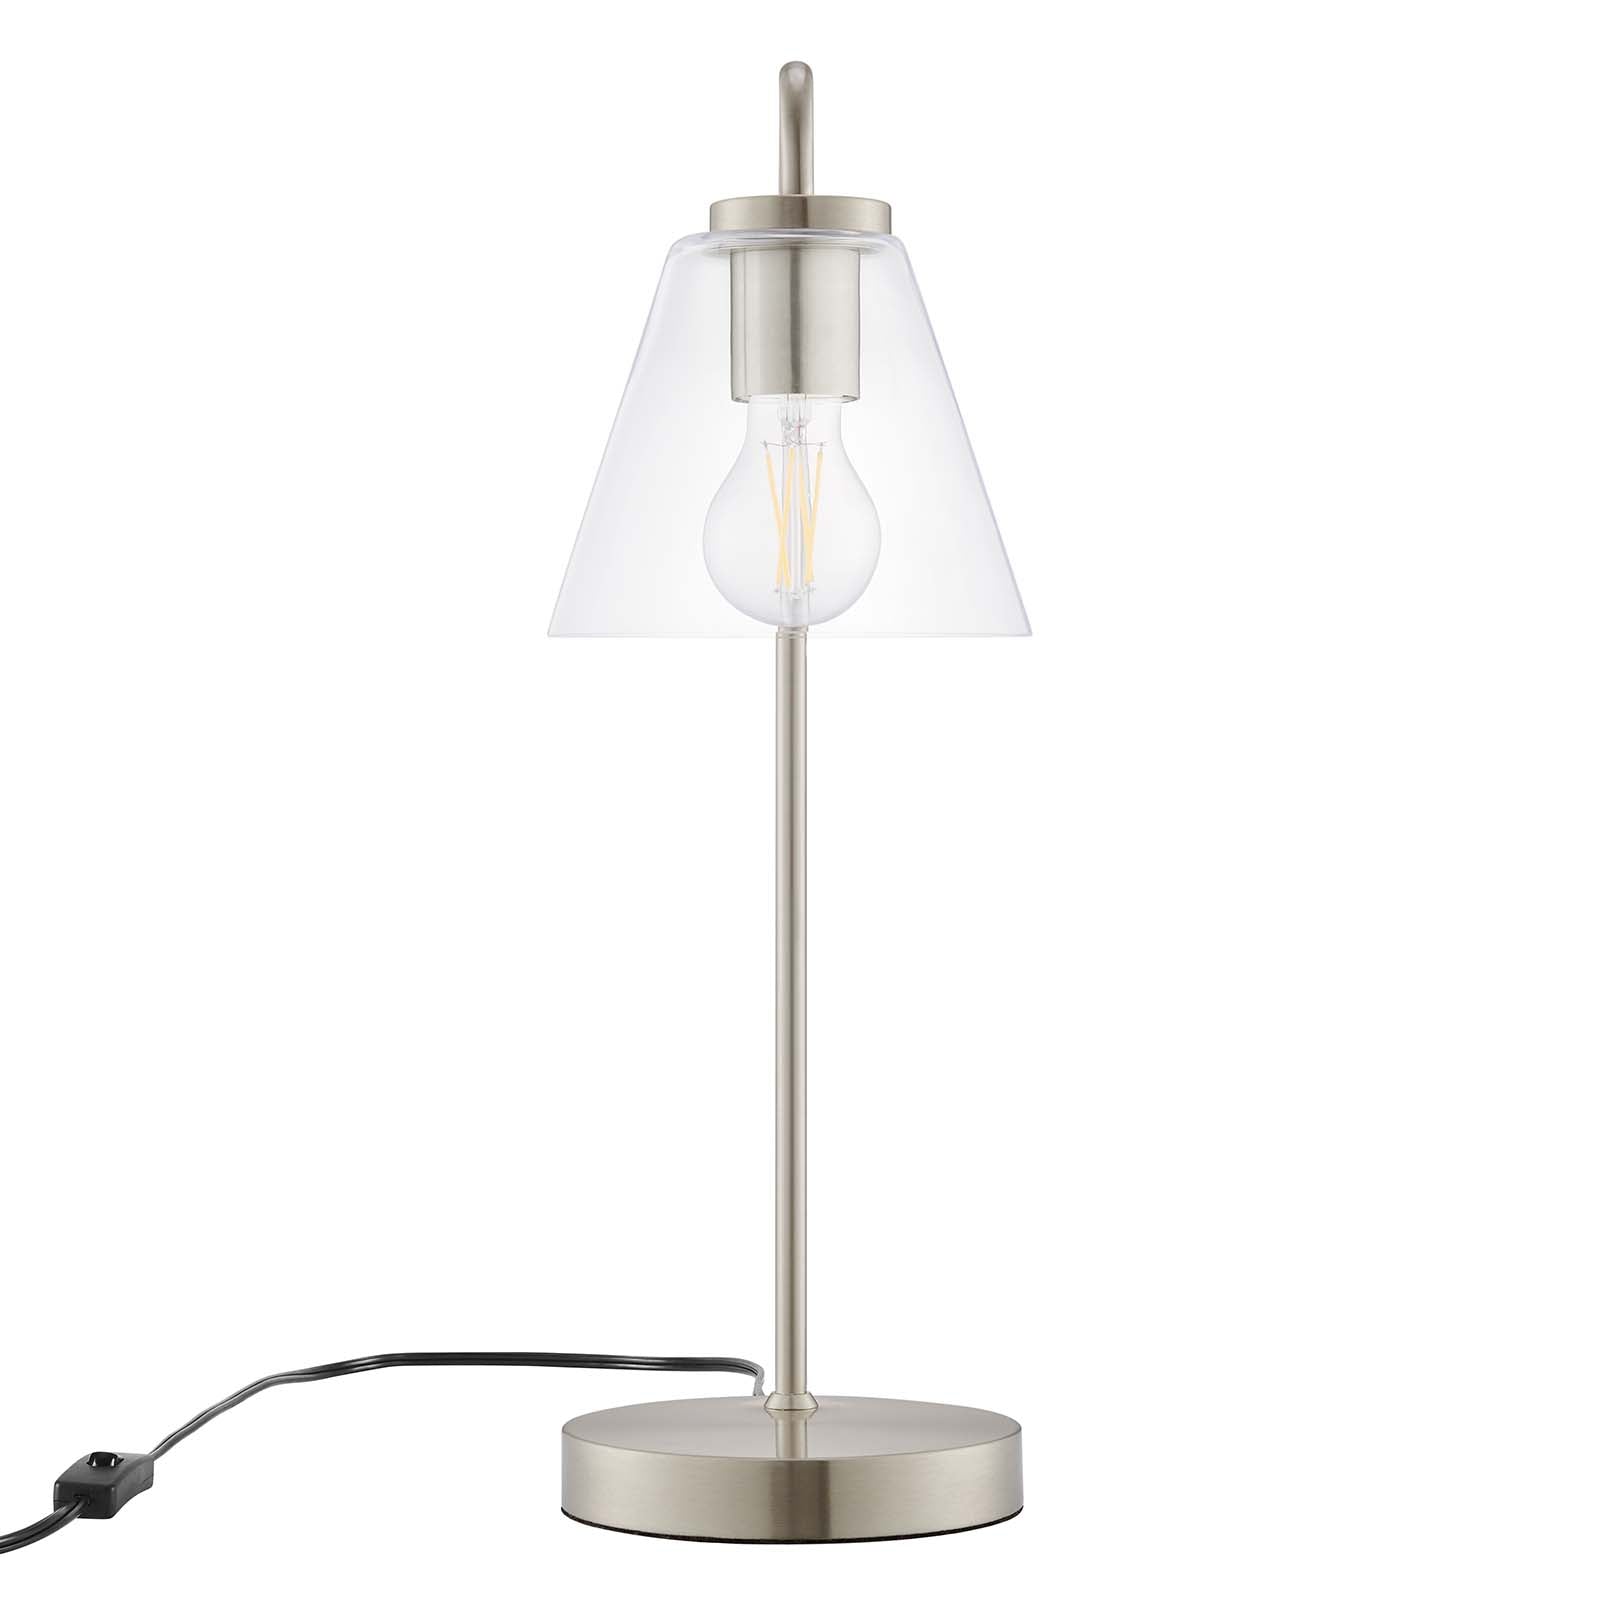 Modway Table Lamps - Element Glass Table Lamp Satin Nickel